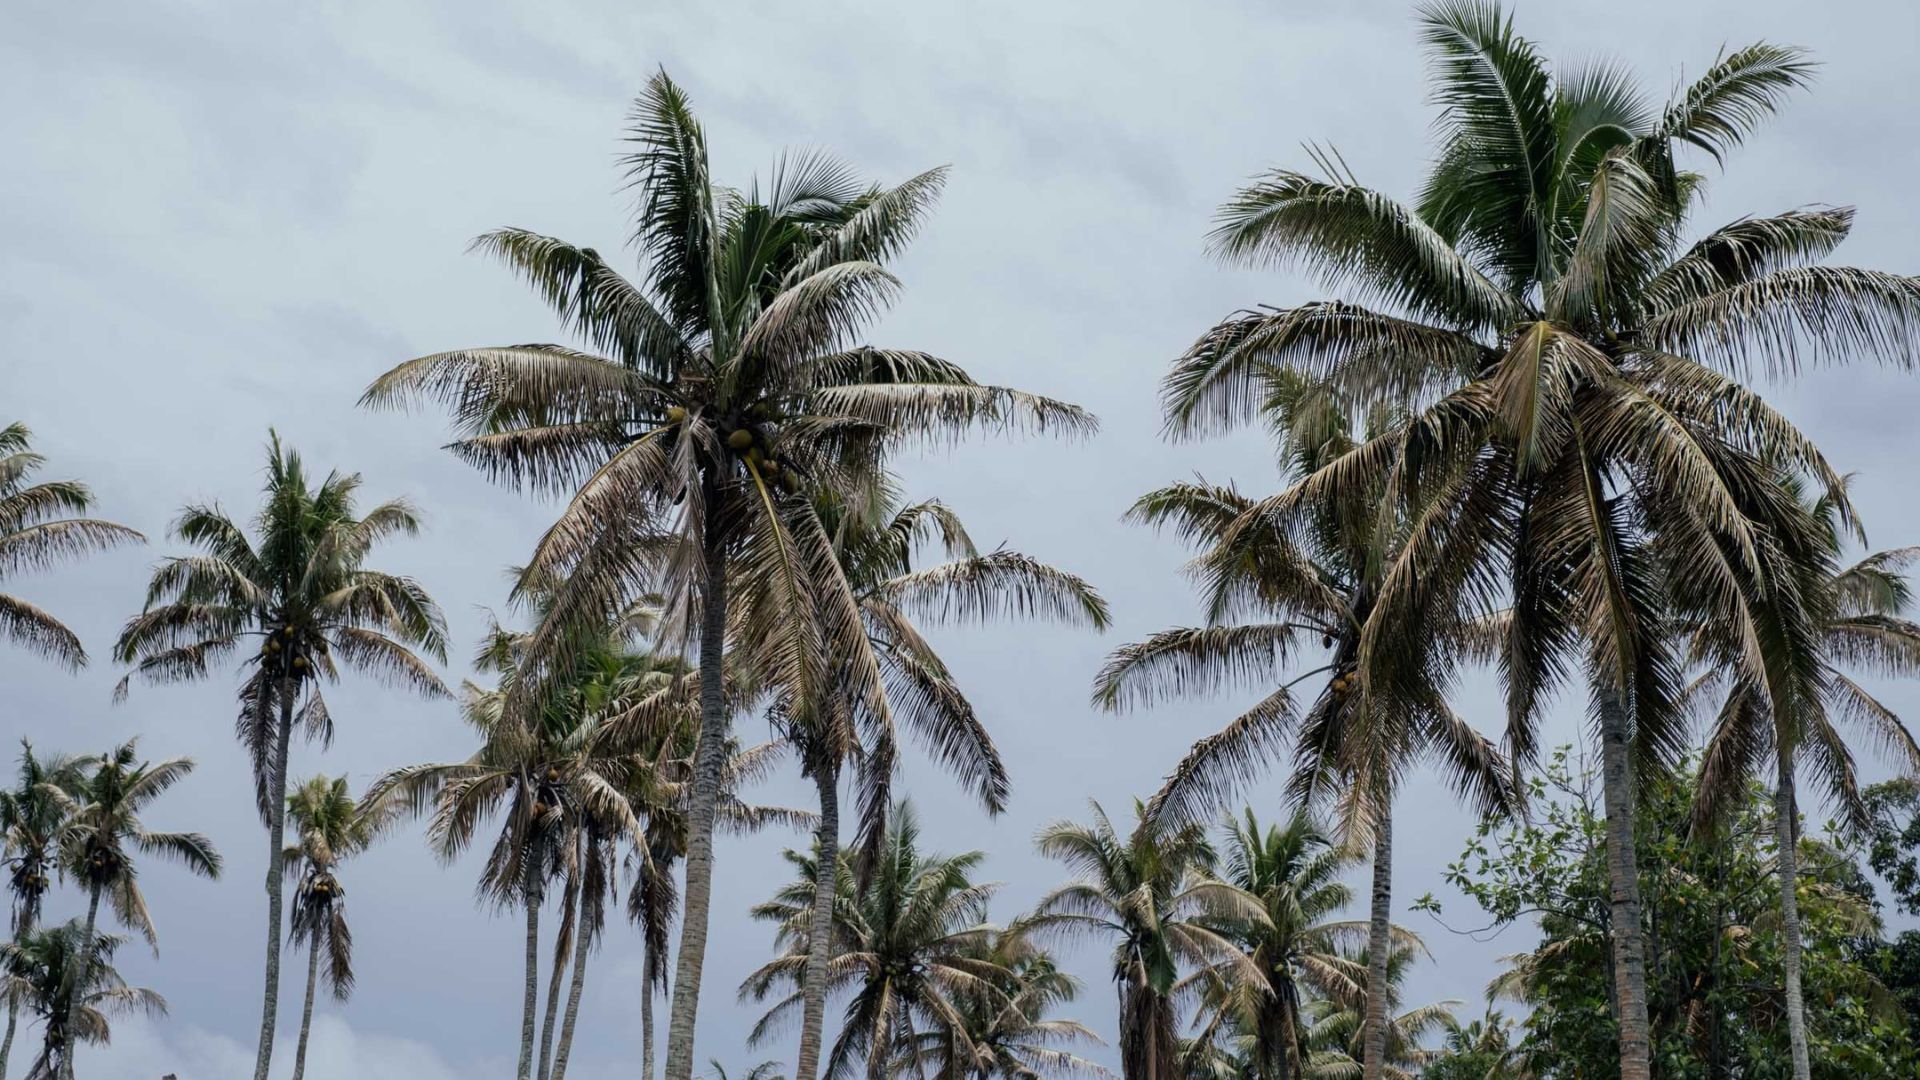 Coconut trees in Tonga swaying in the wind.